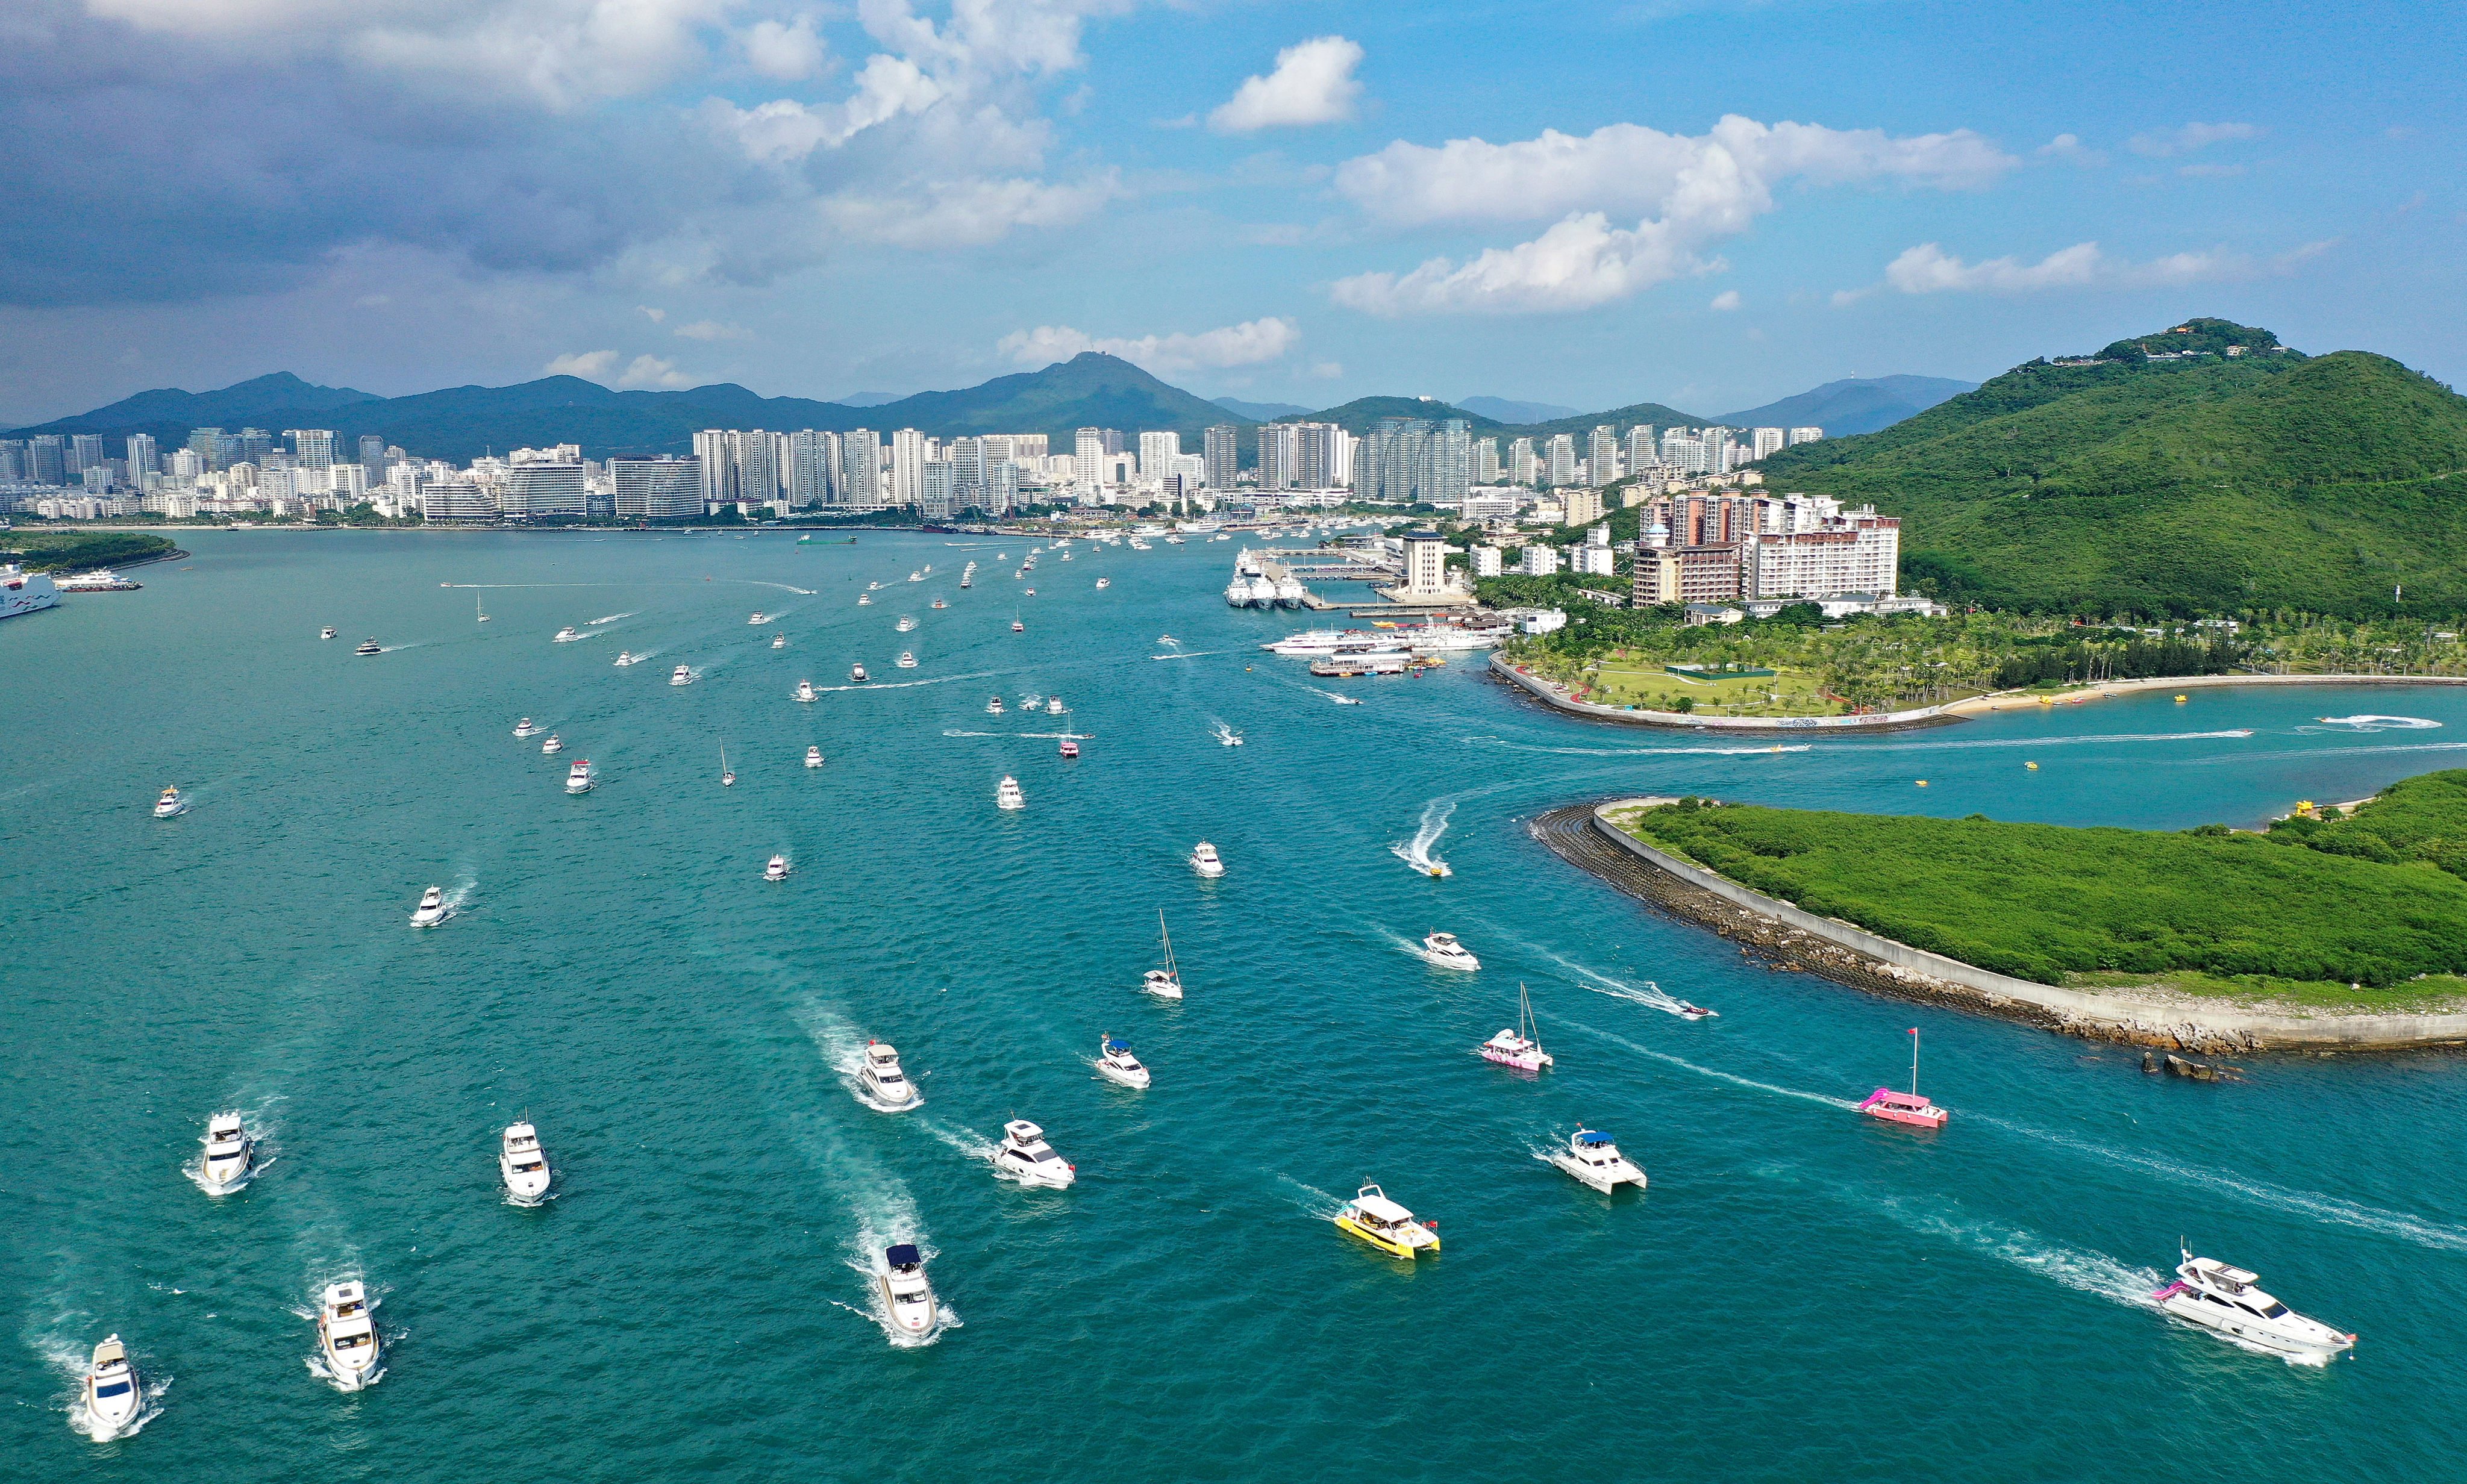 Boating is just one of the attractions for tourists visiting Sanya, dubbed “China’s Hawaii”, seen here on October 1. China’s domestic tourism is going from strength to strength, as travellers put off international trips. Photo: Xinhua 